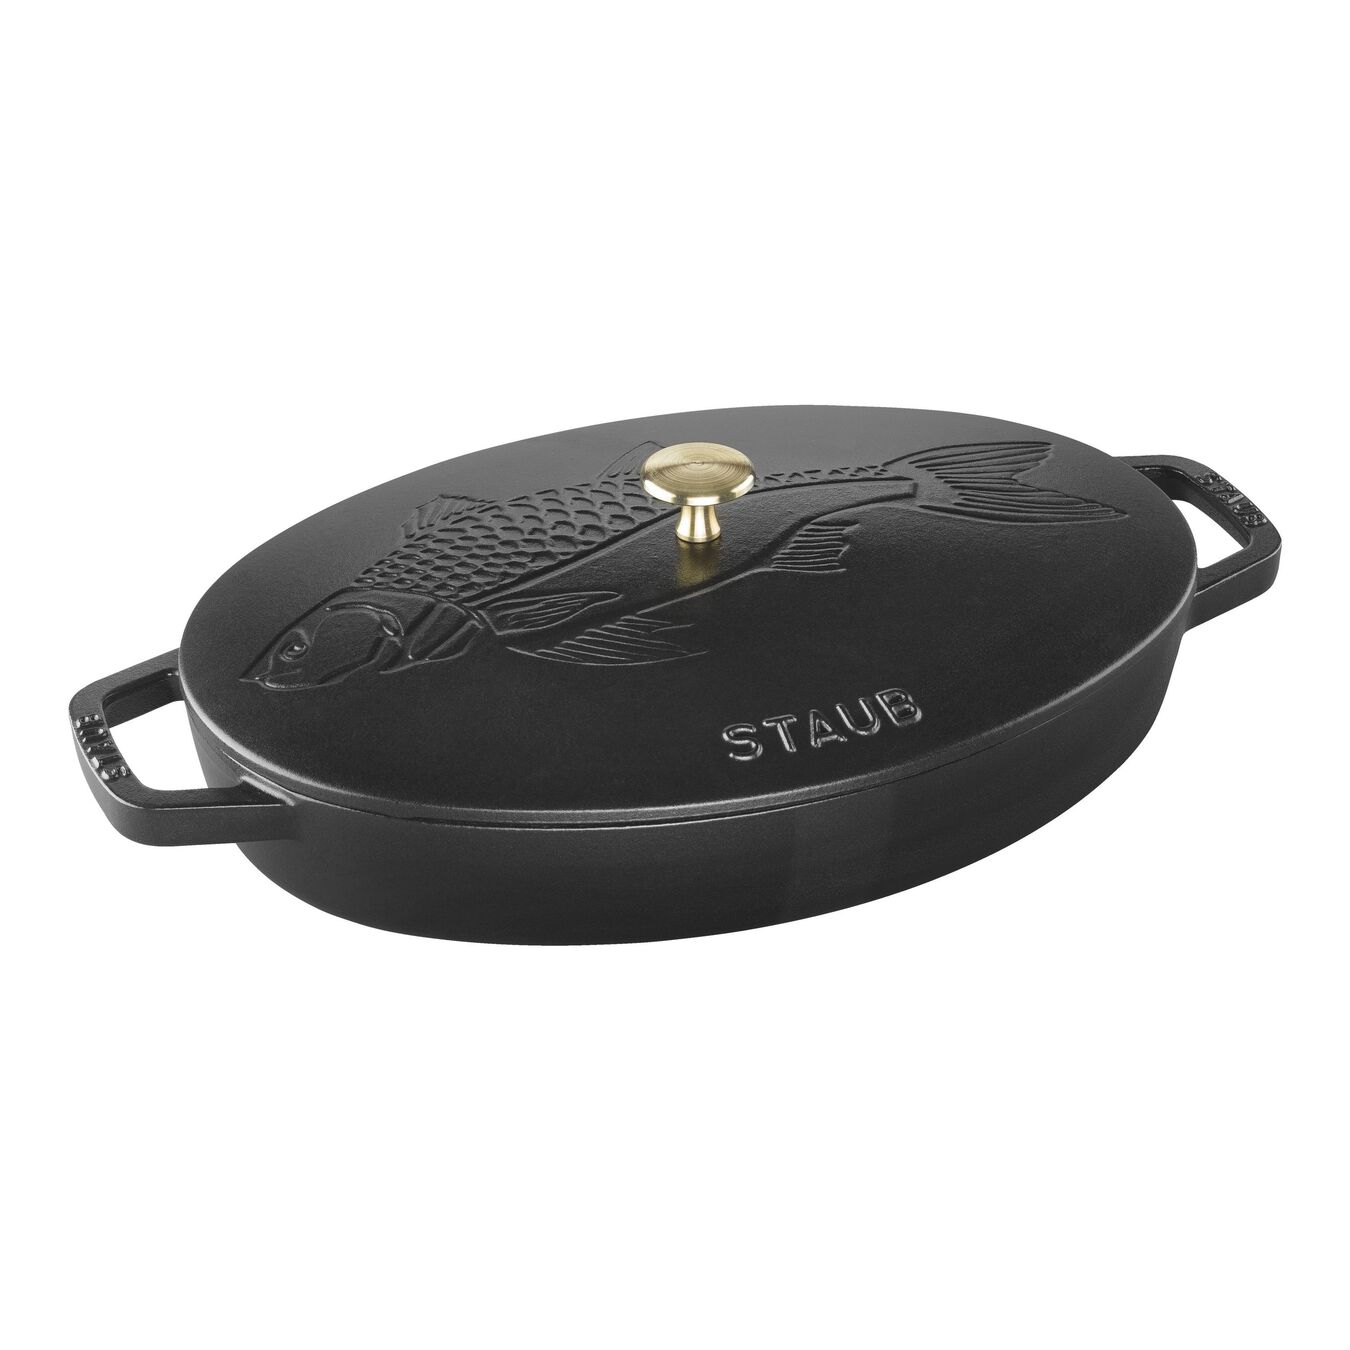 13-inch, oval, Oven dish with lid, black matte,,large 1